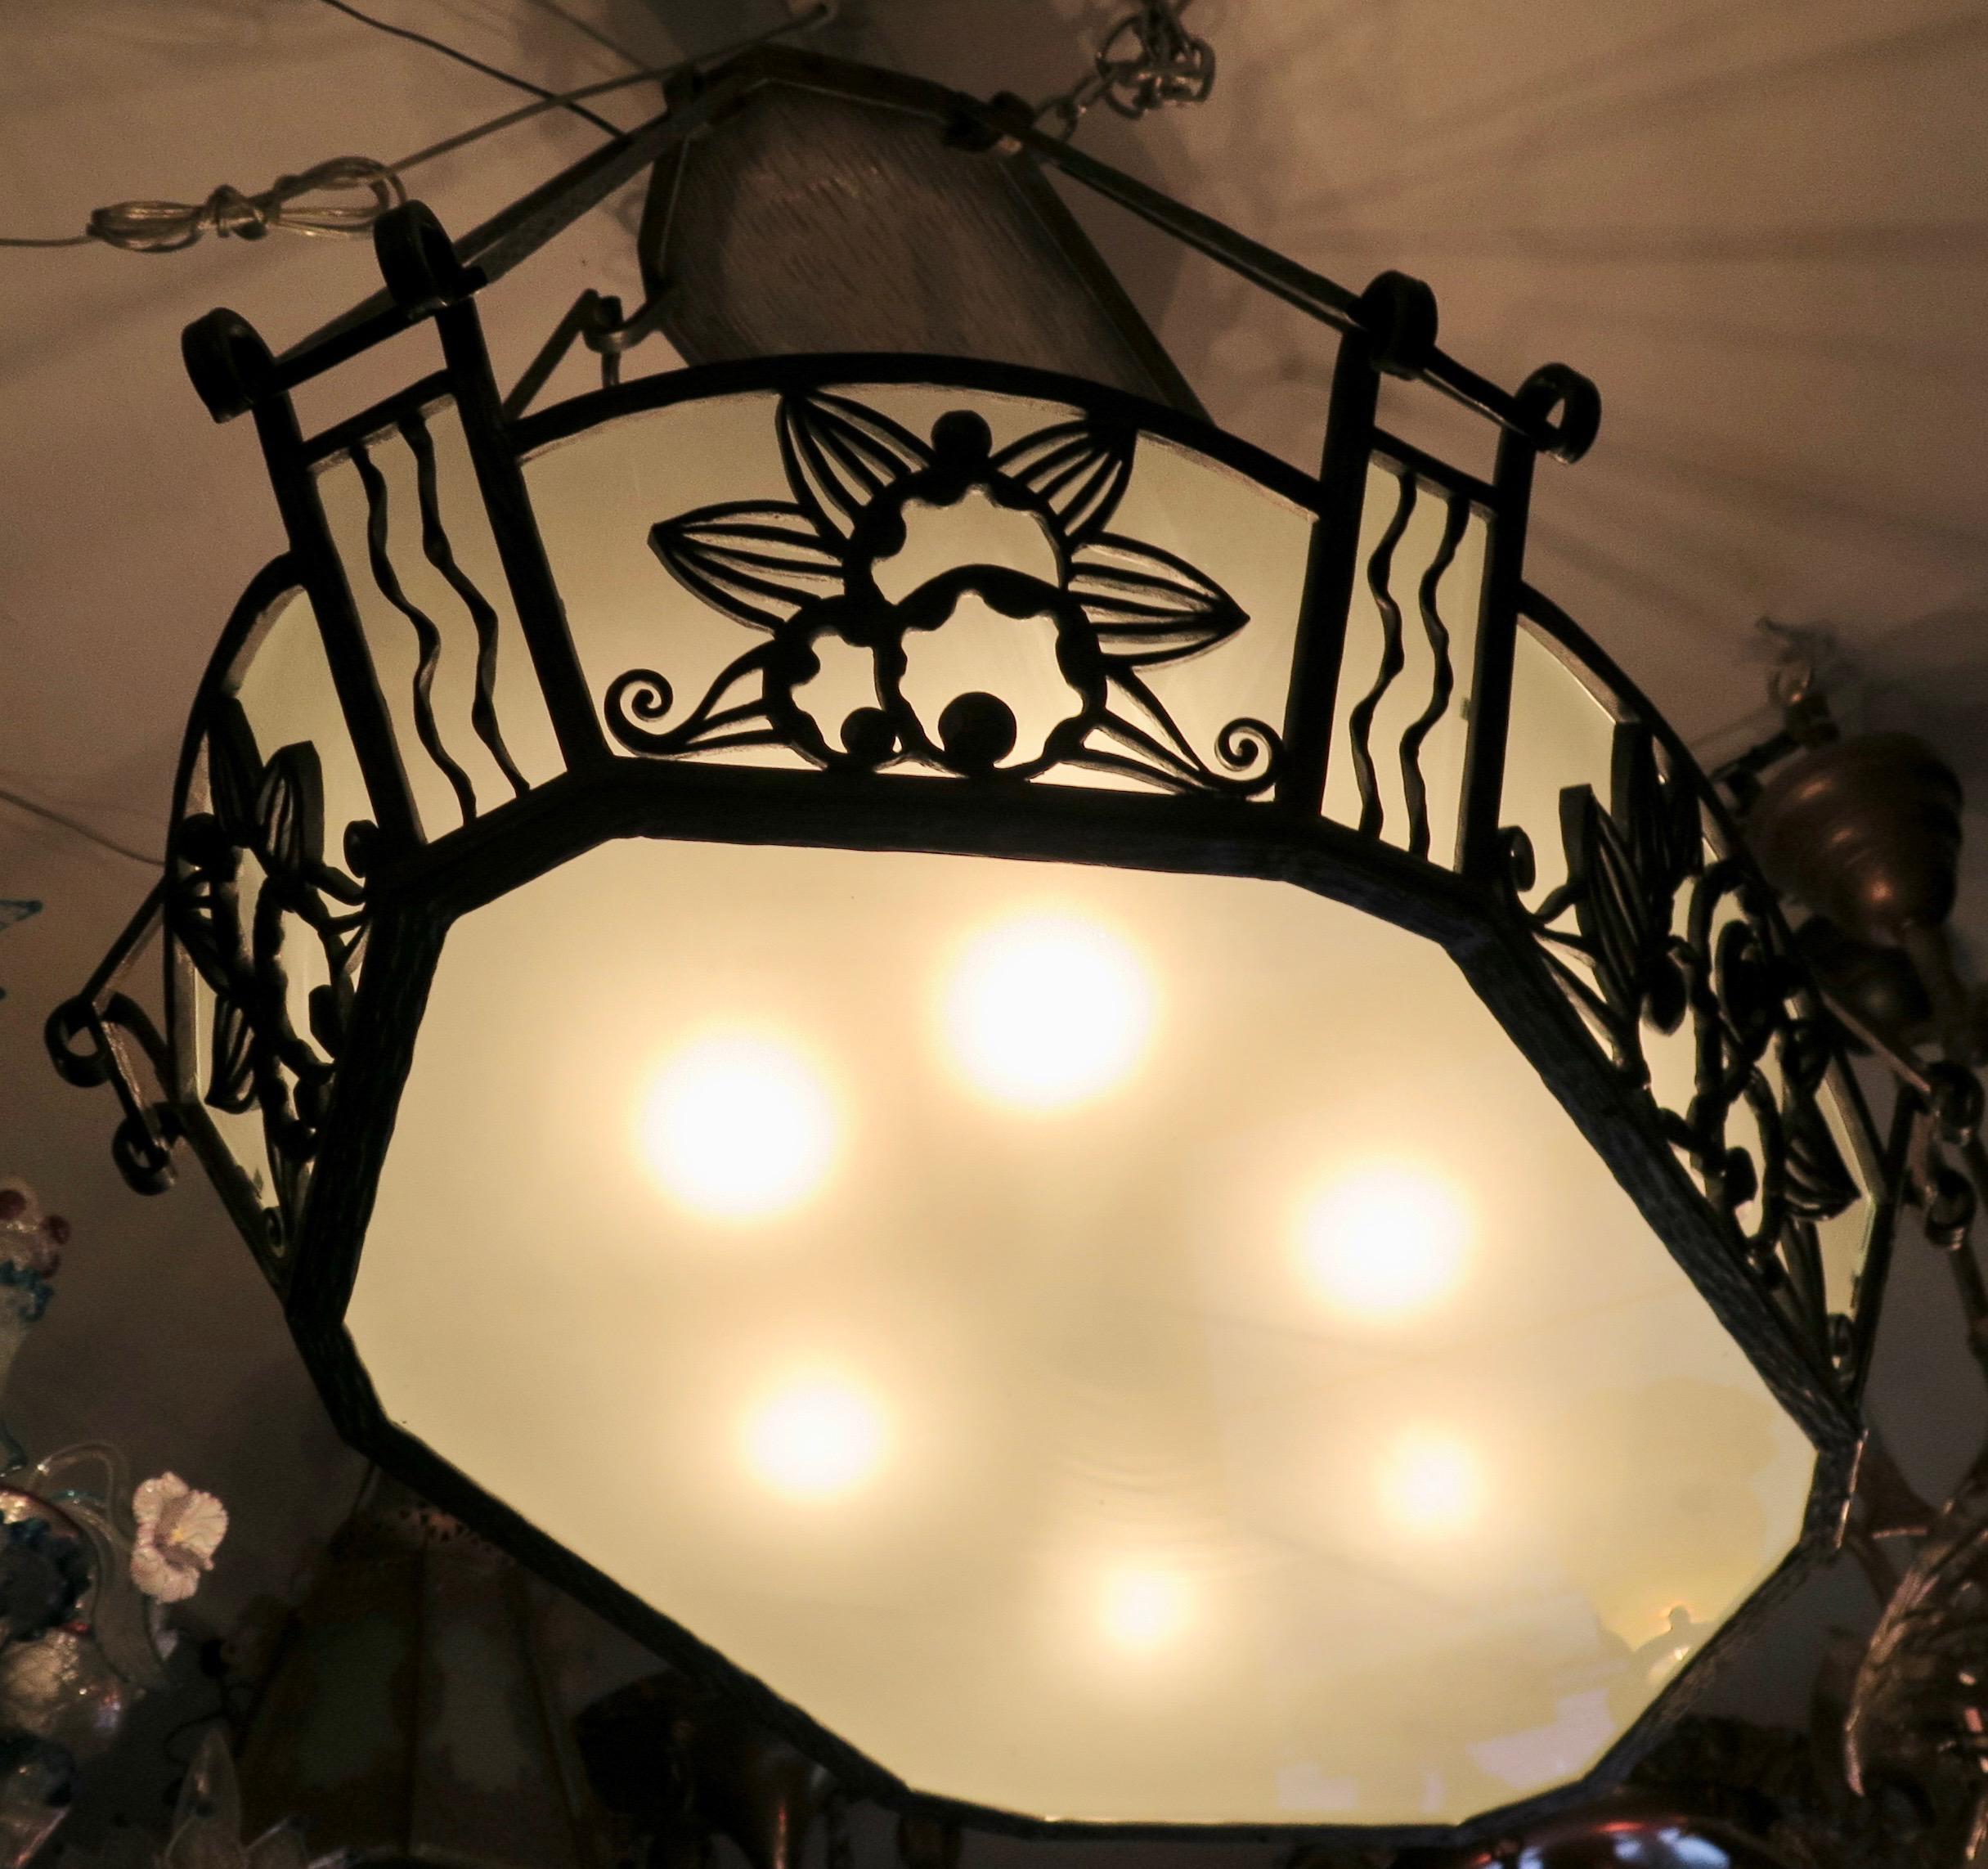 This vintage early 20th century is designed by Paul Kiss. It is a suspended fixture with a gondola like shape, designed with wrought iron metal work accented with frosted glass panels. There are four support arms that attach to a ceiling plate to